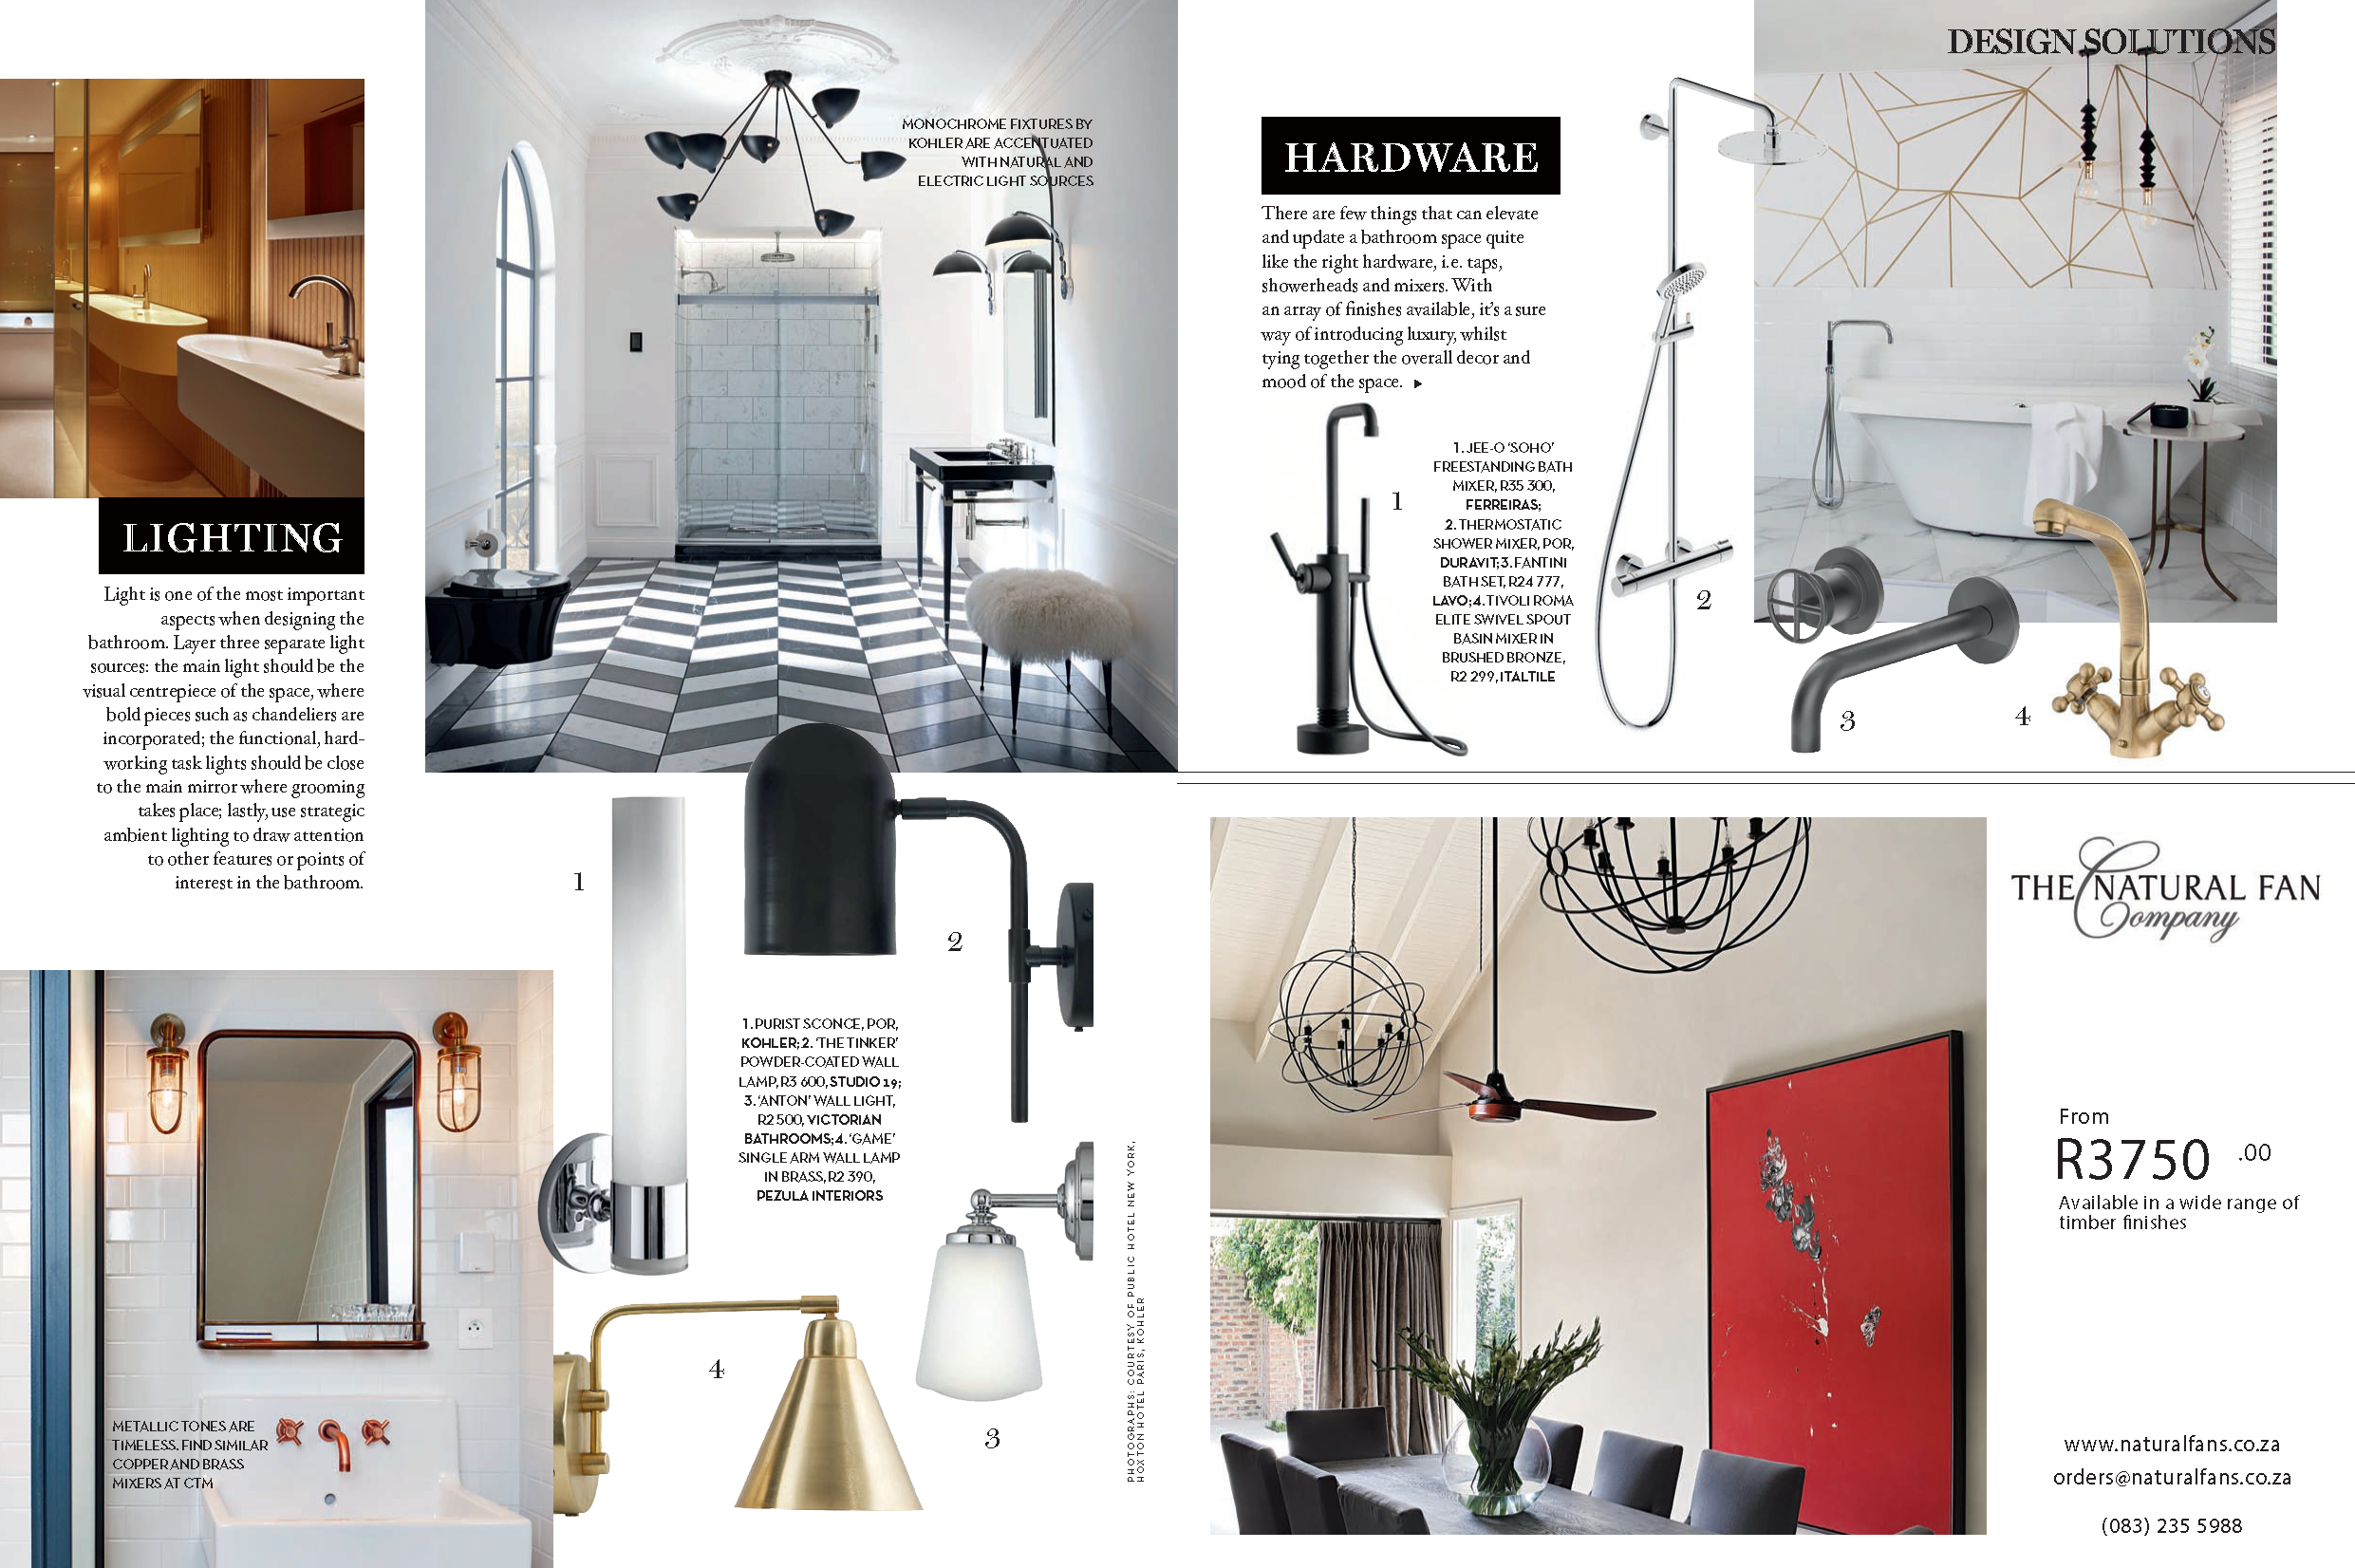 H&G Nov 18_DesignSolutions_Bathrooms_Page_3.png